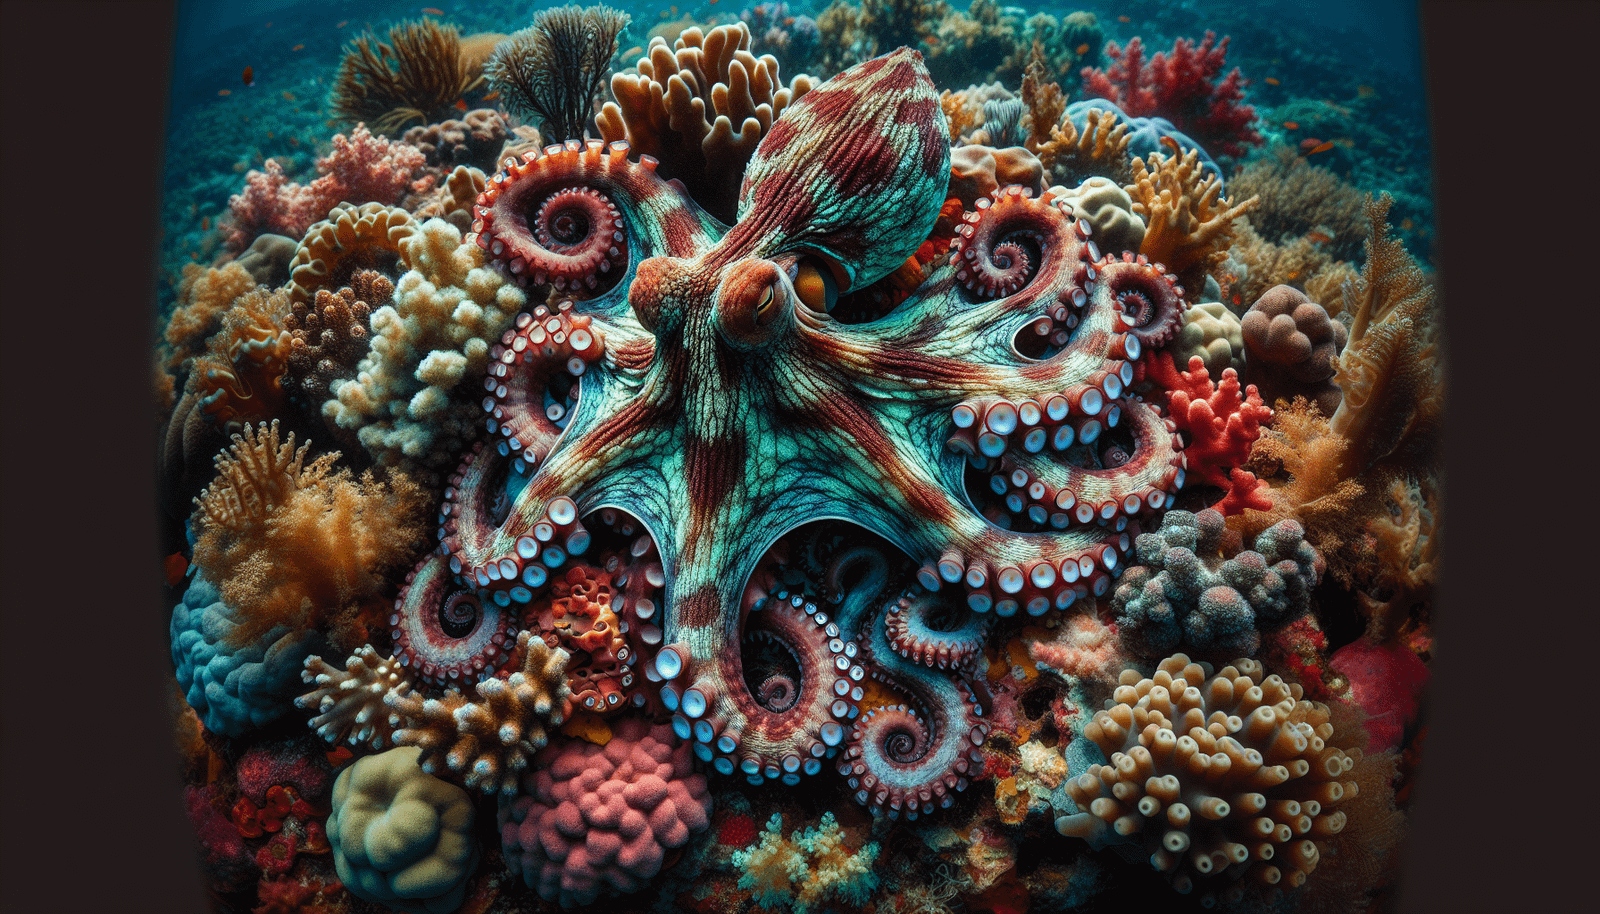 An octopus camouflaged among coral reef rocks using its color-changing skin